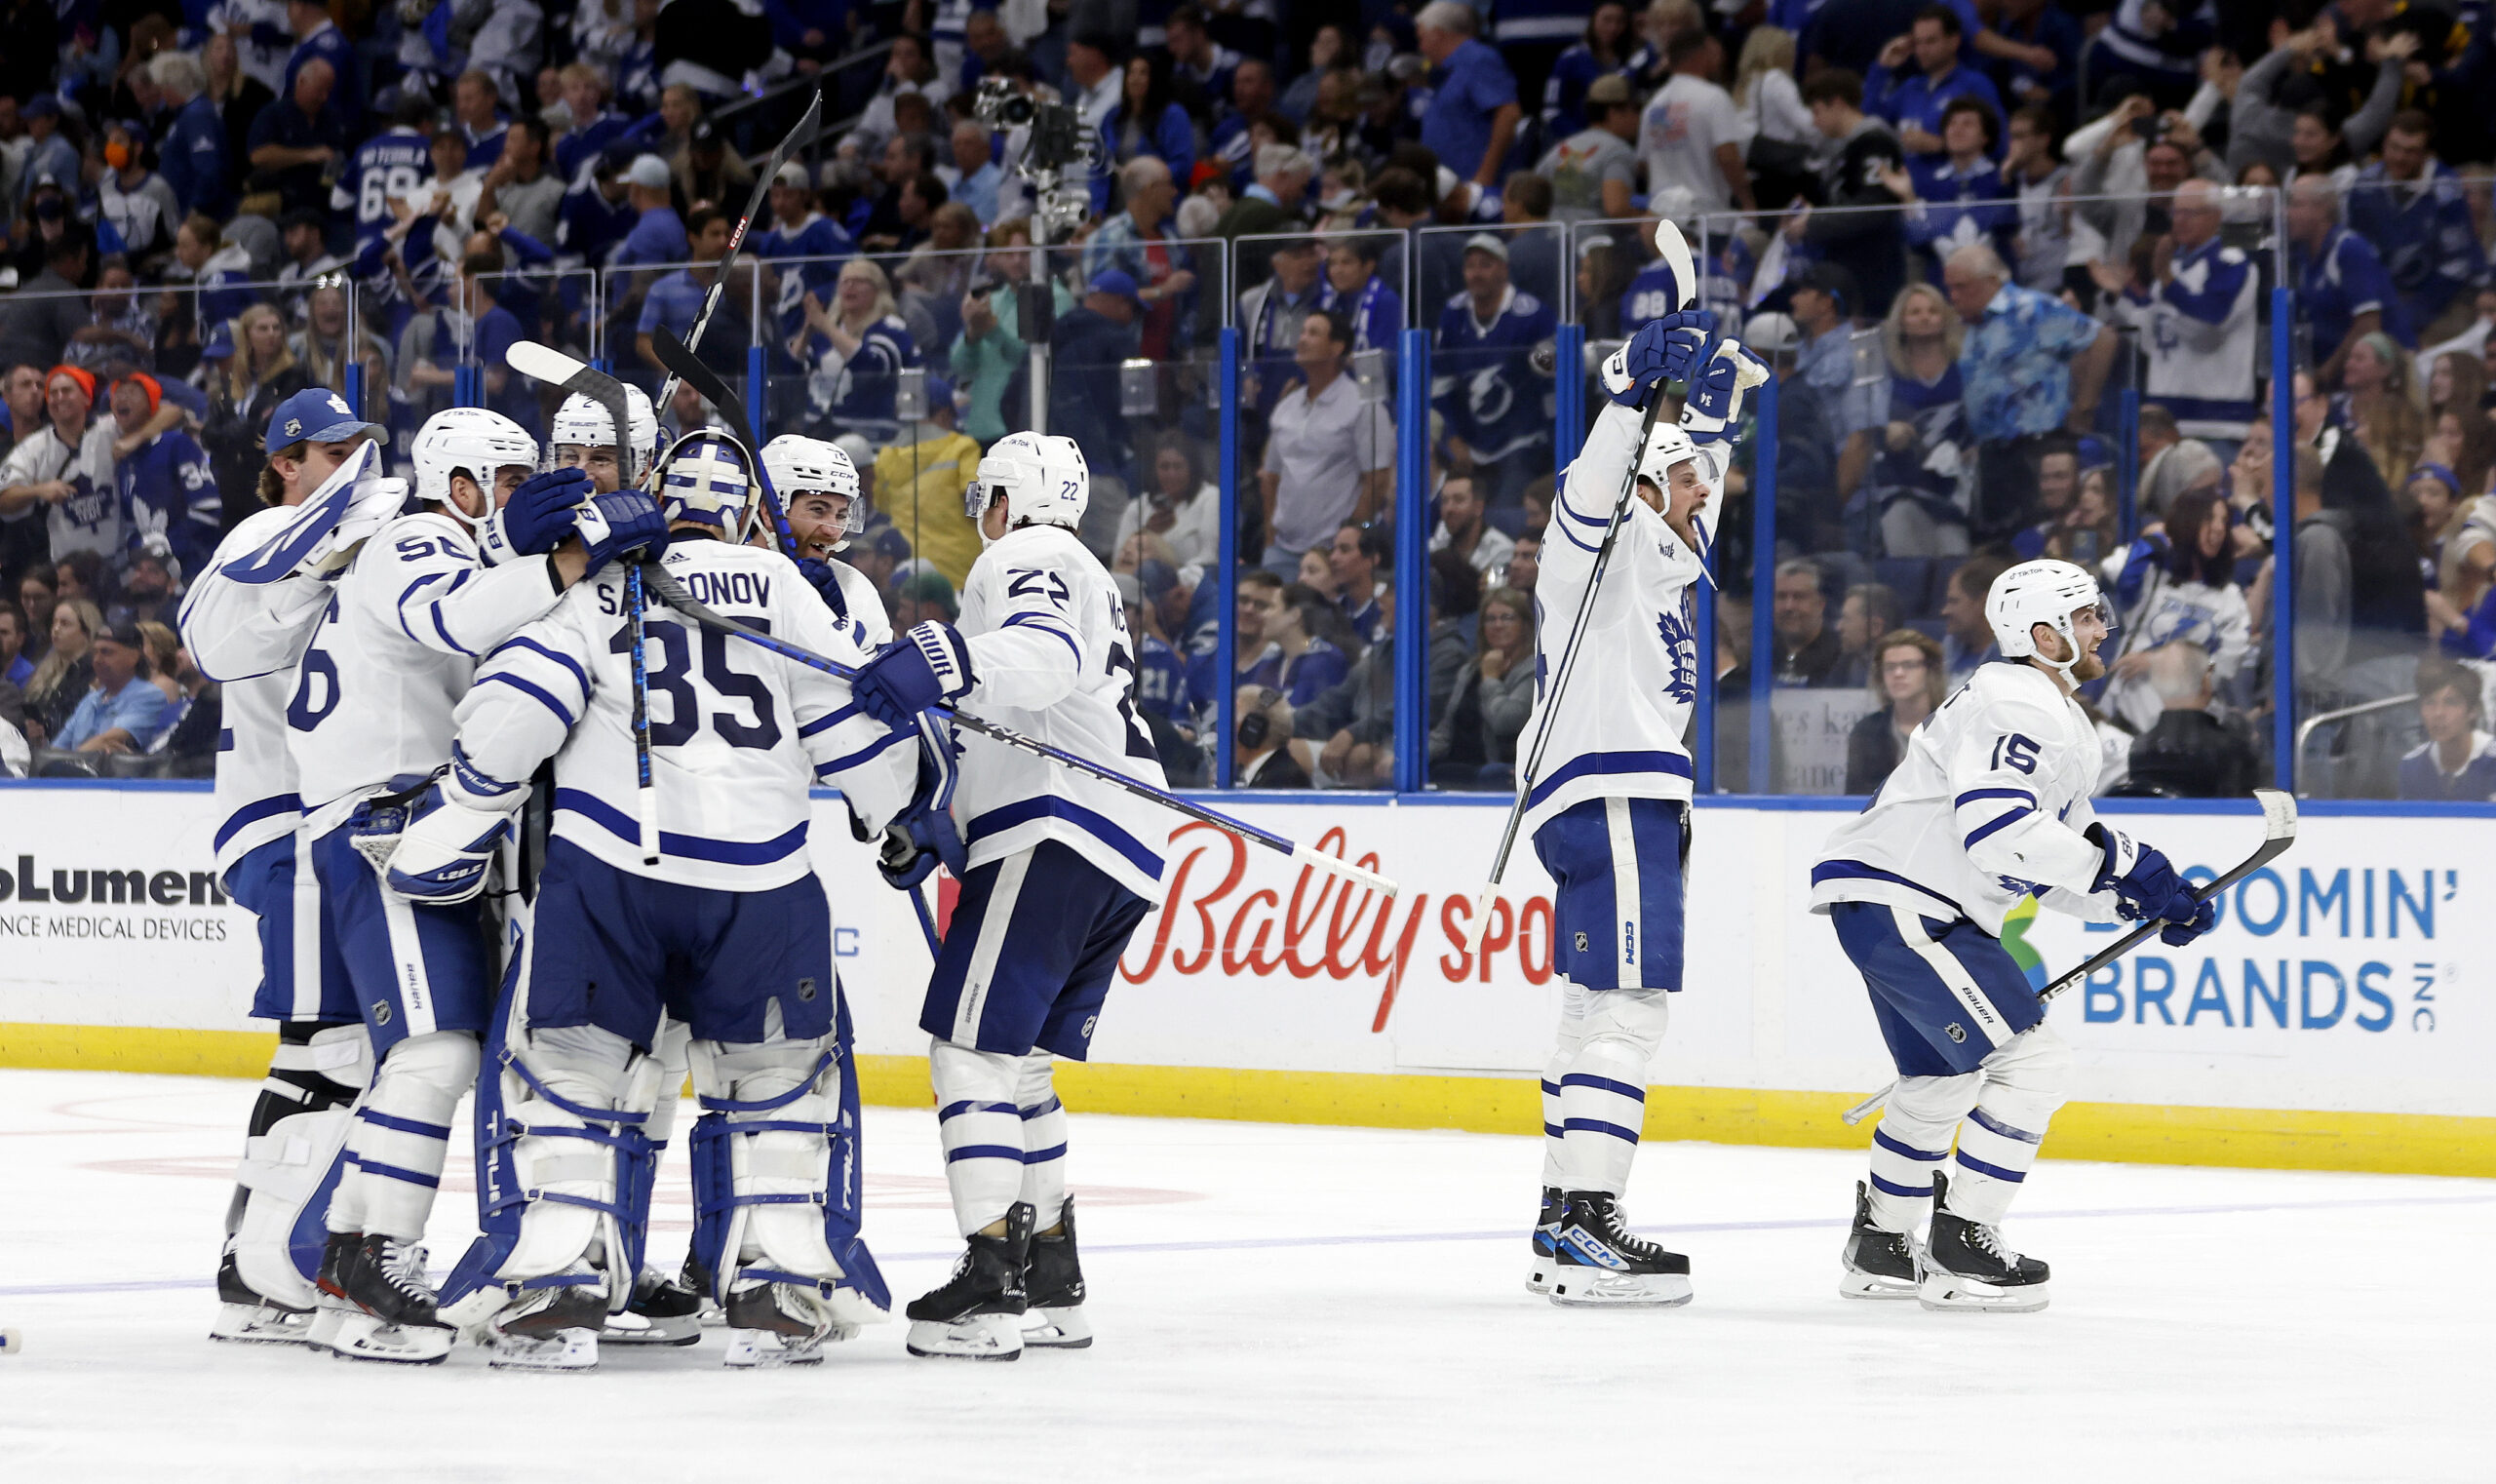 Toronto Maple Leafs: History suggests strong cup chance